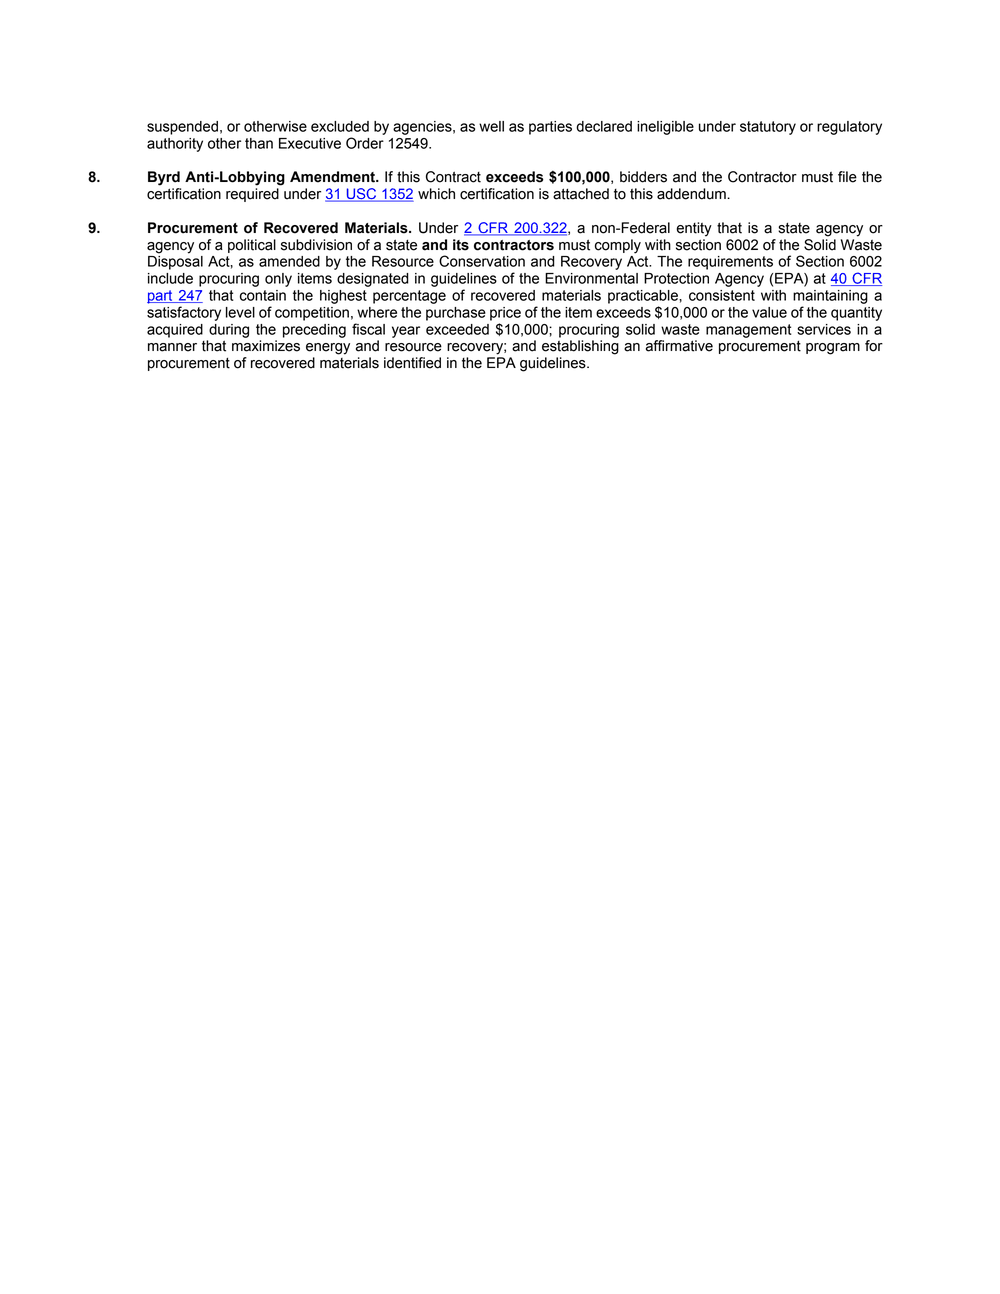 Page 84 from State of Michigan 2020 Kaseware contract